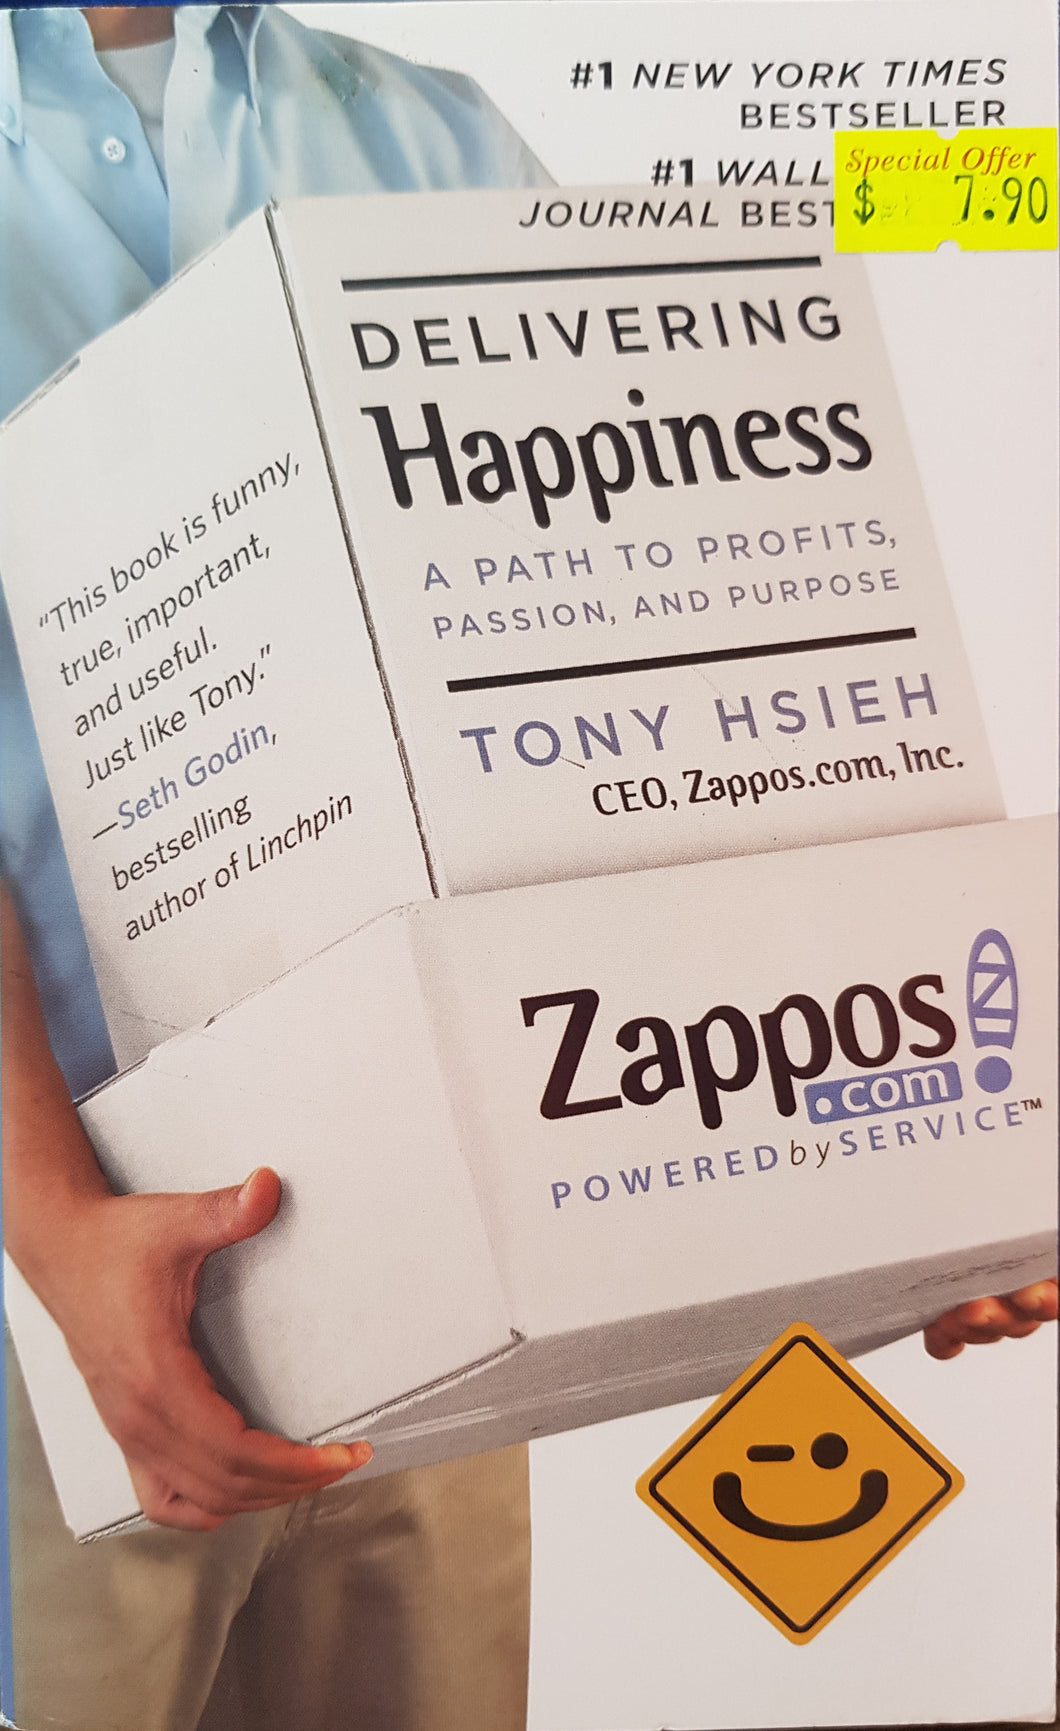 Delivering Happiness: A Path to Profits, Passion and Purpose - Tony Hsieh